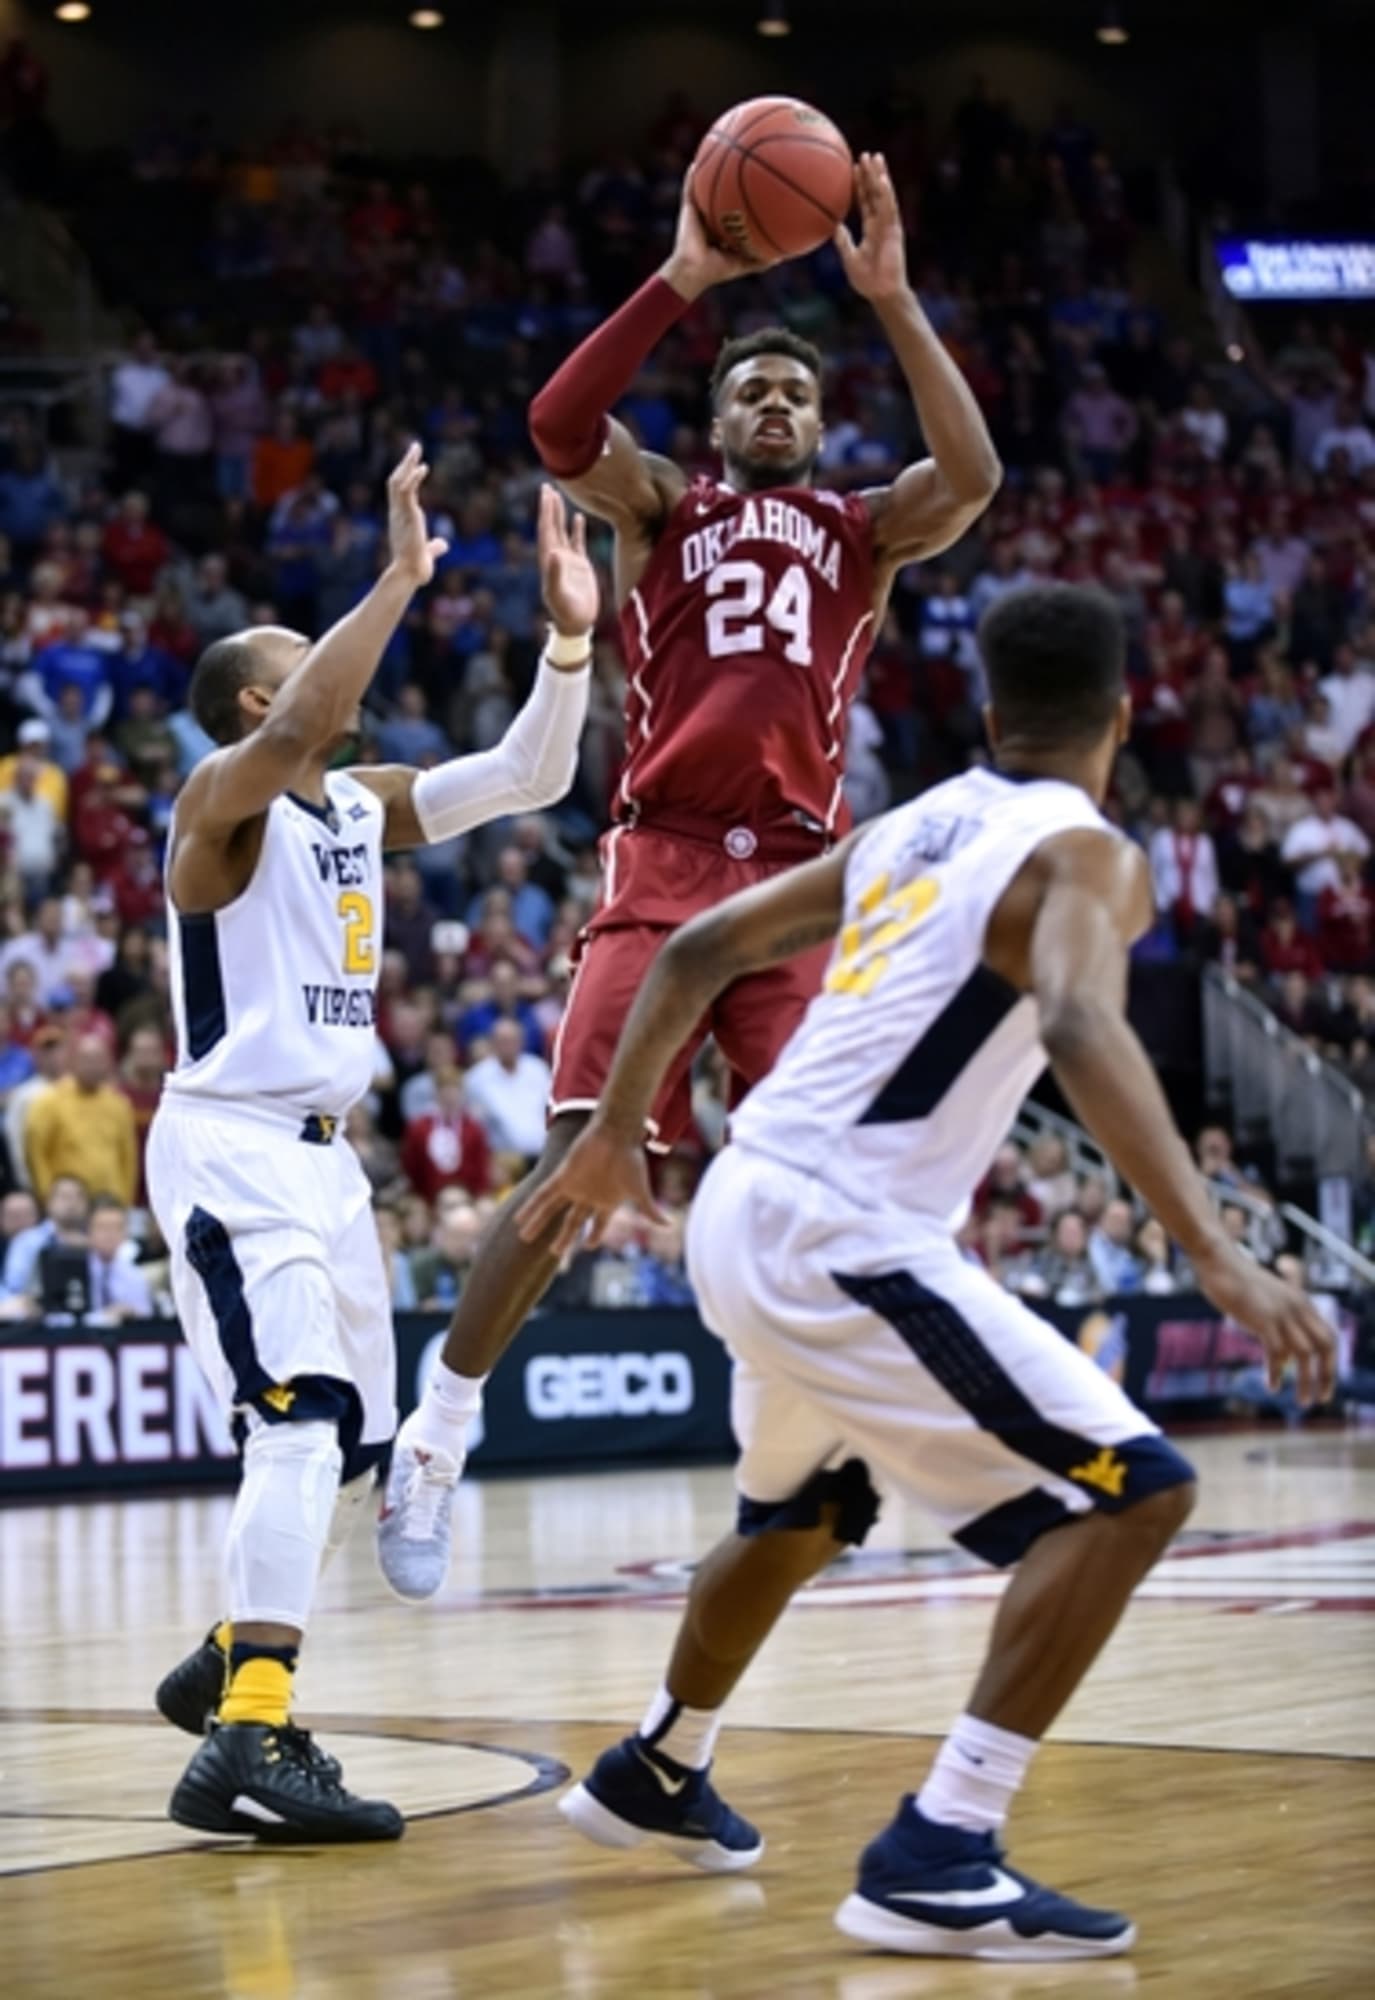 Oklahoma's Buddy Hield gives Sooners a great shot – The Denver Post